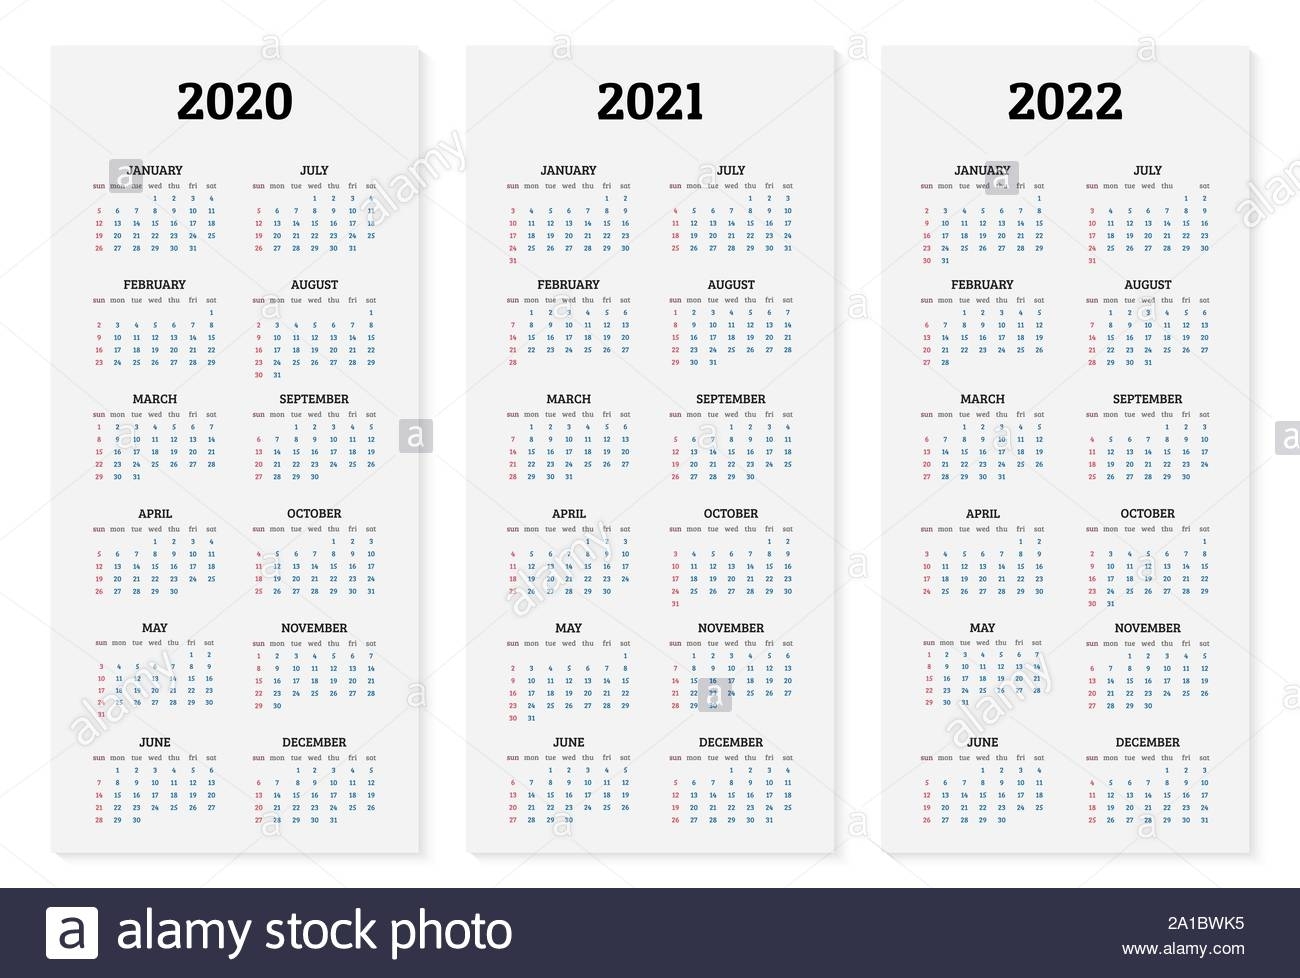 Calendar 2021 High Resolution Stock Photography And Images